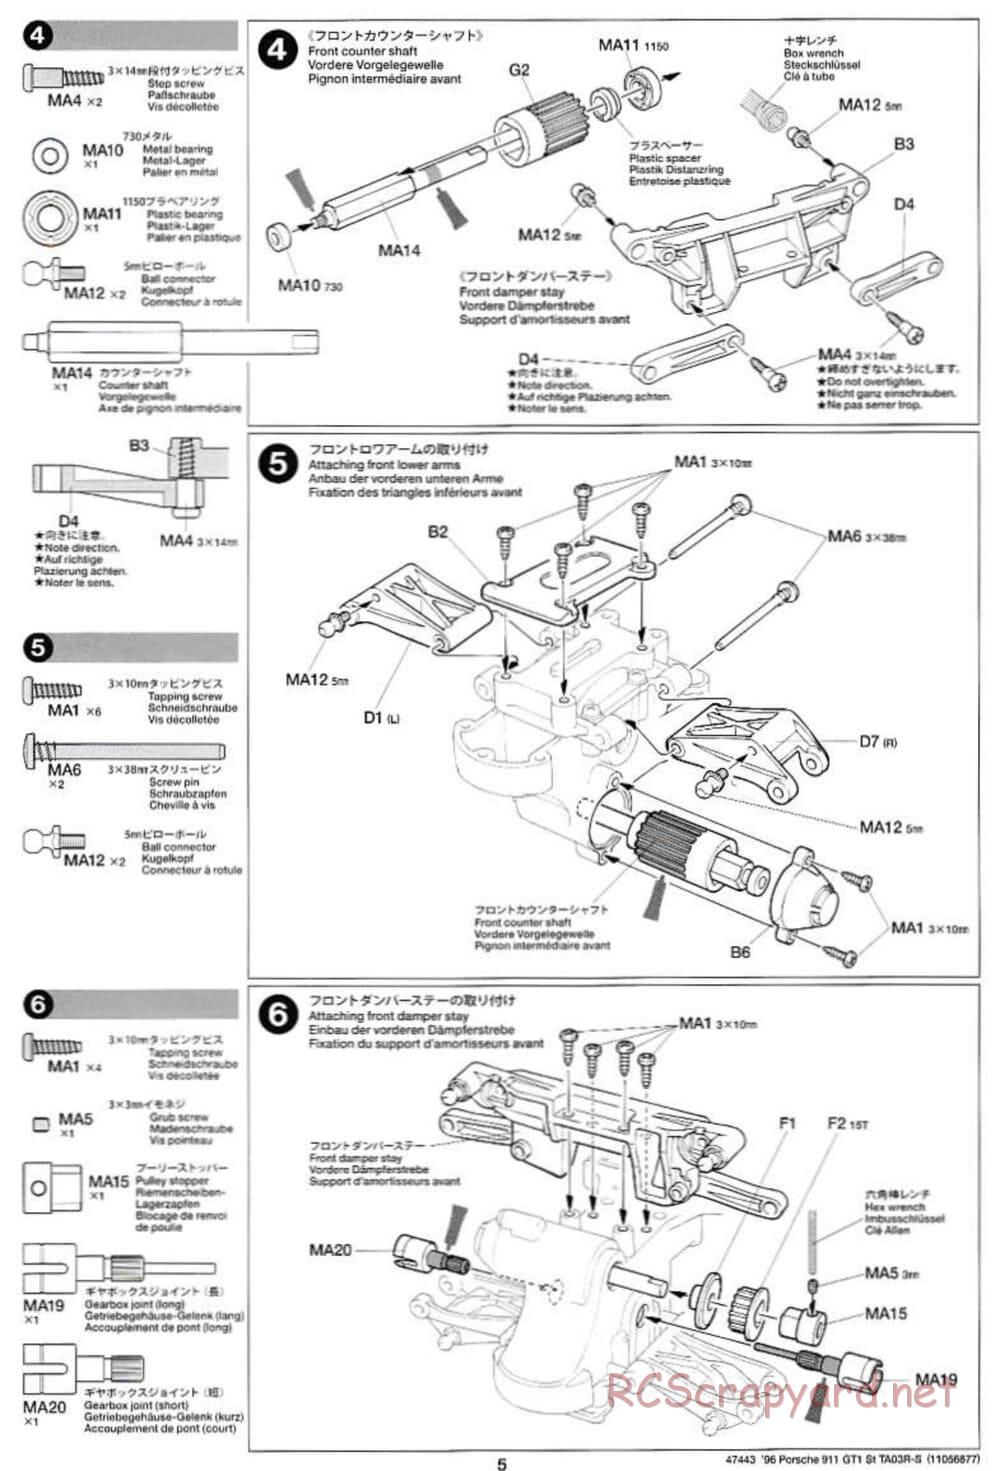 Tamiya - Porsche 911 GT1 Street - TA-03RS Chassis - Manual - Page 5